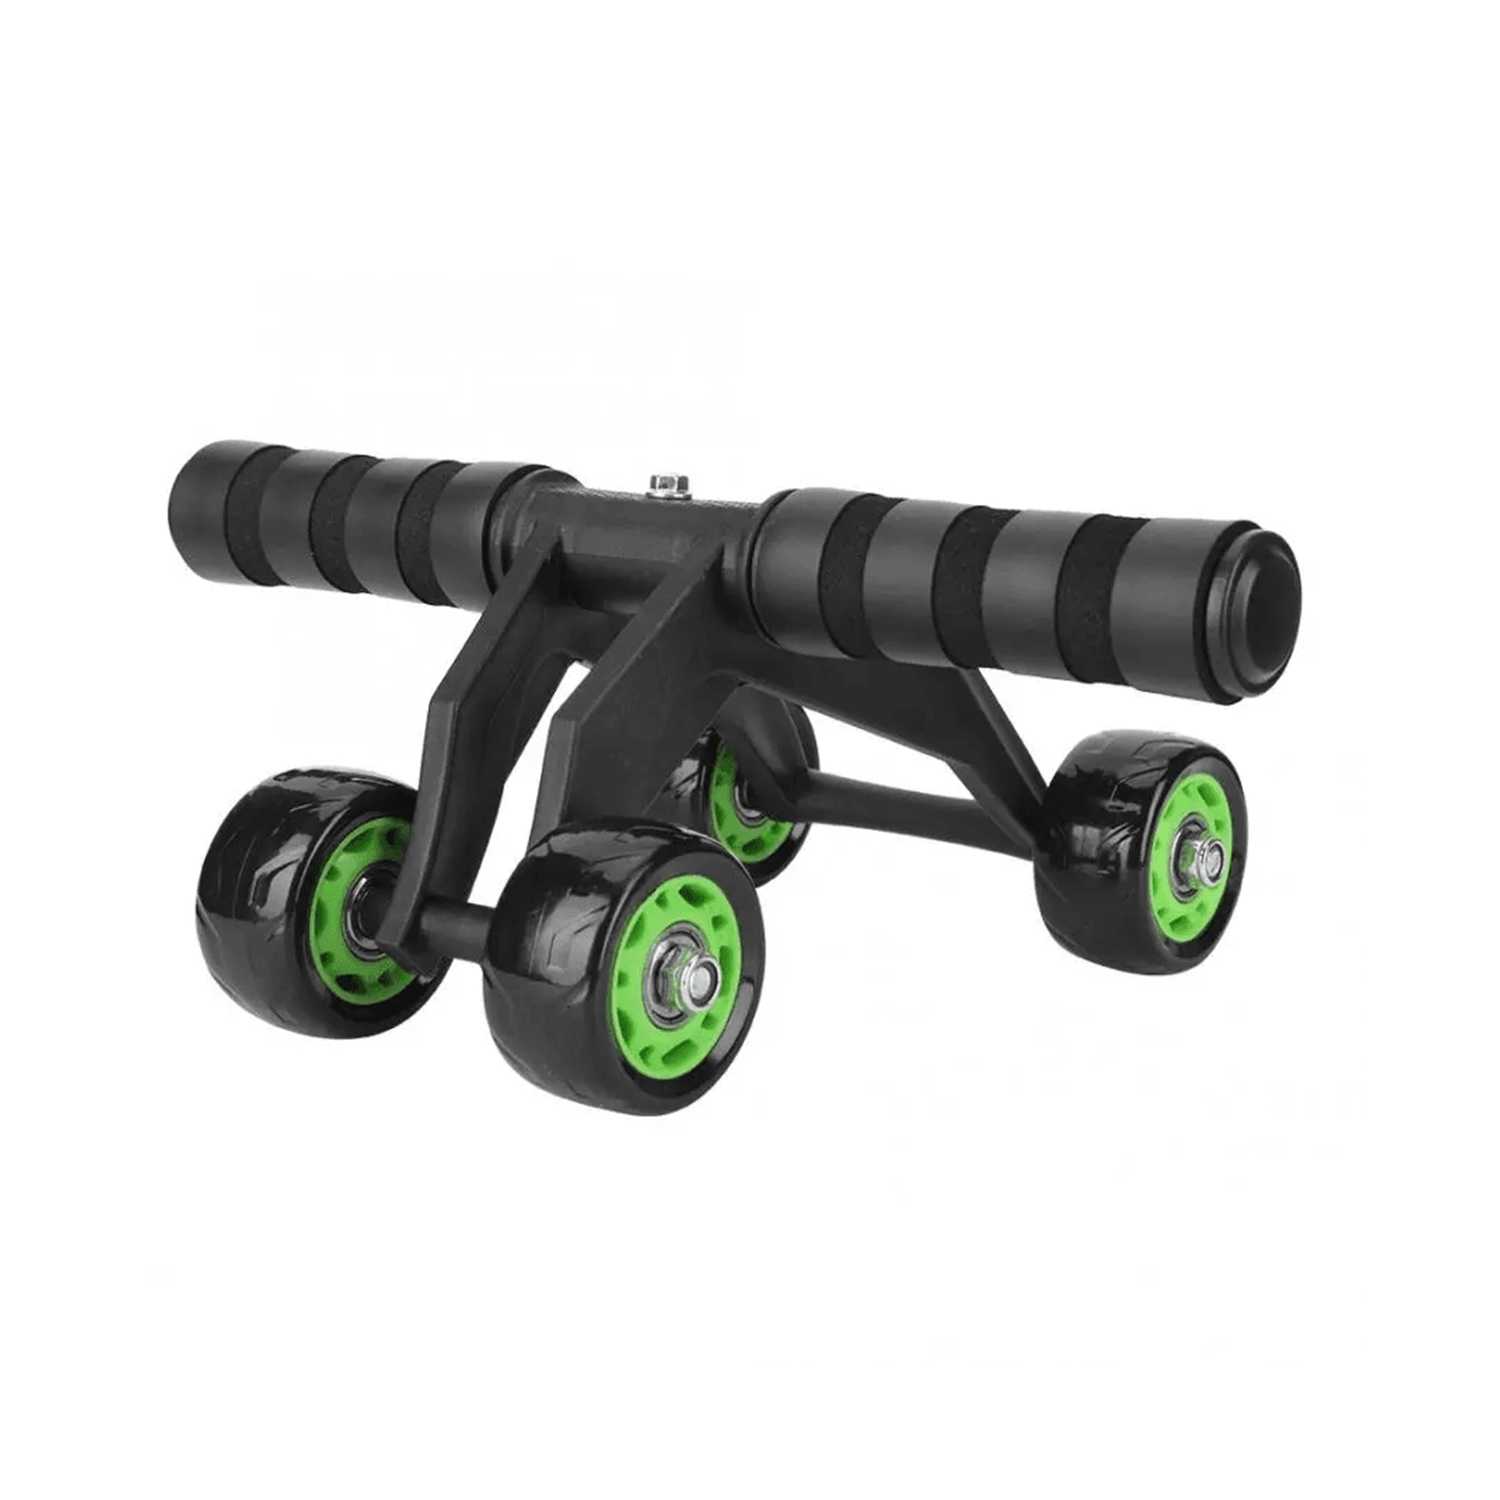 Helix Four Wheeled Abdominal Muscle Roller